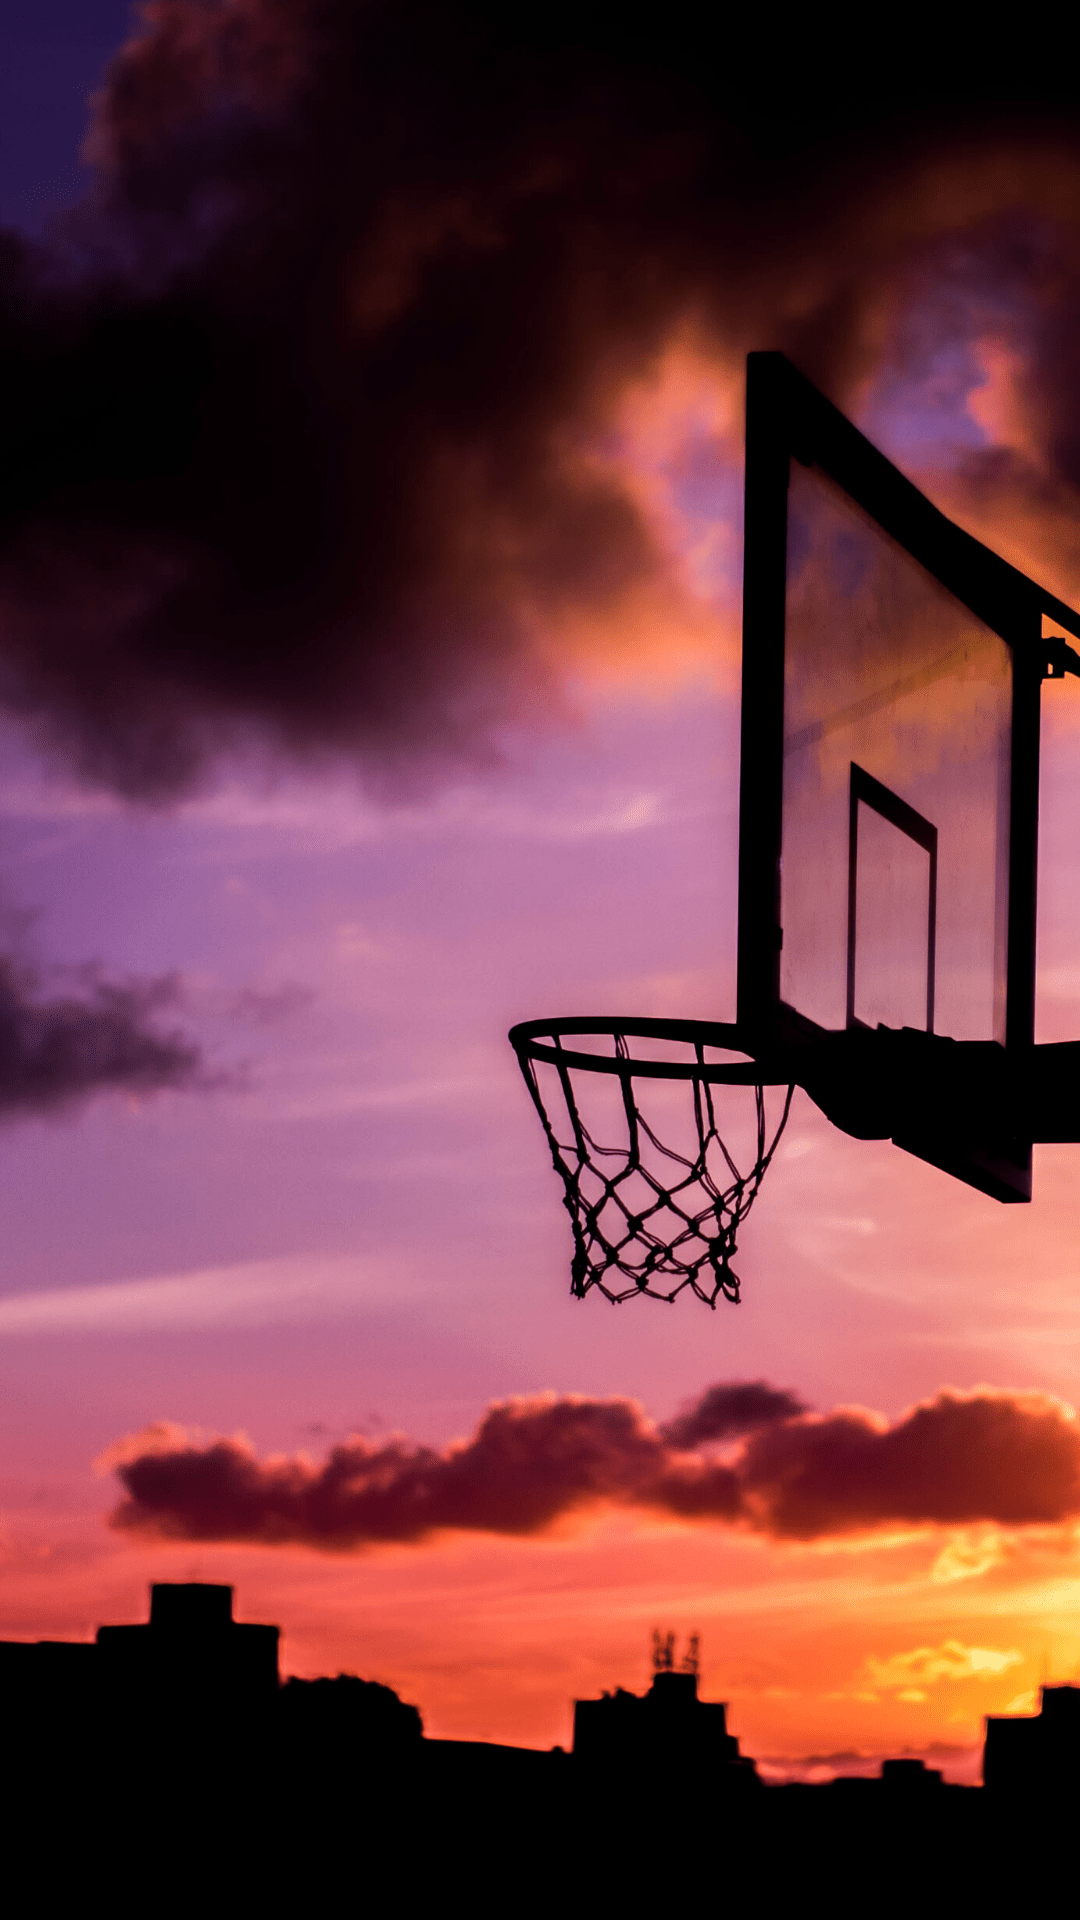 A basketball hoop with a purple and orange sunset in the background. - Basketball